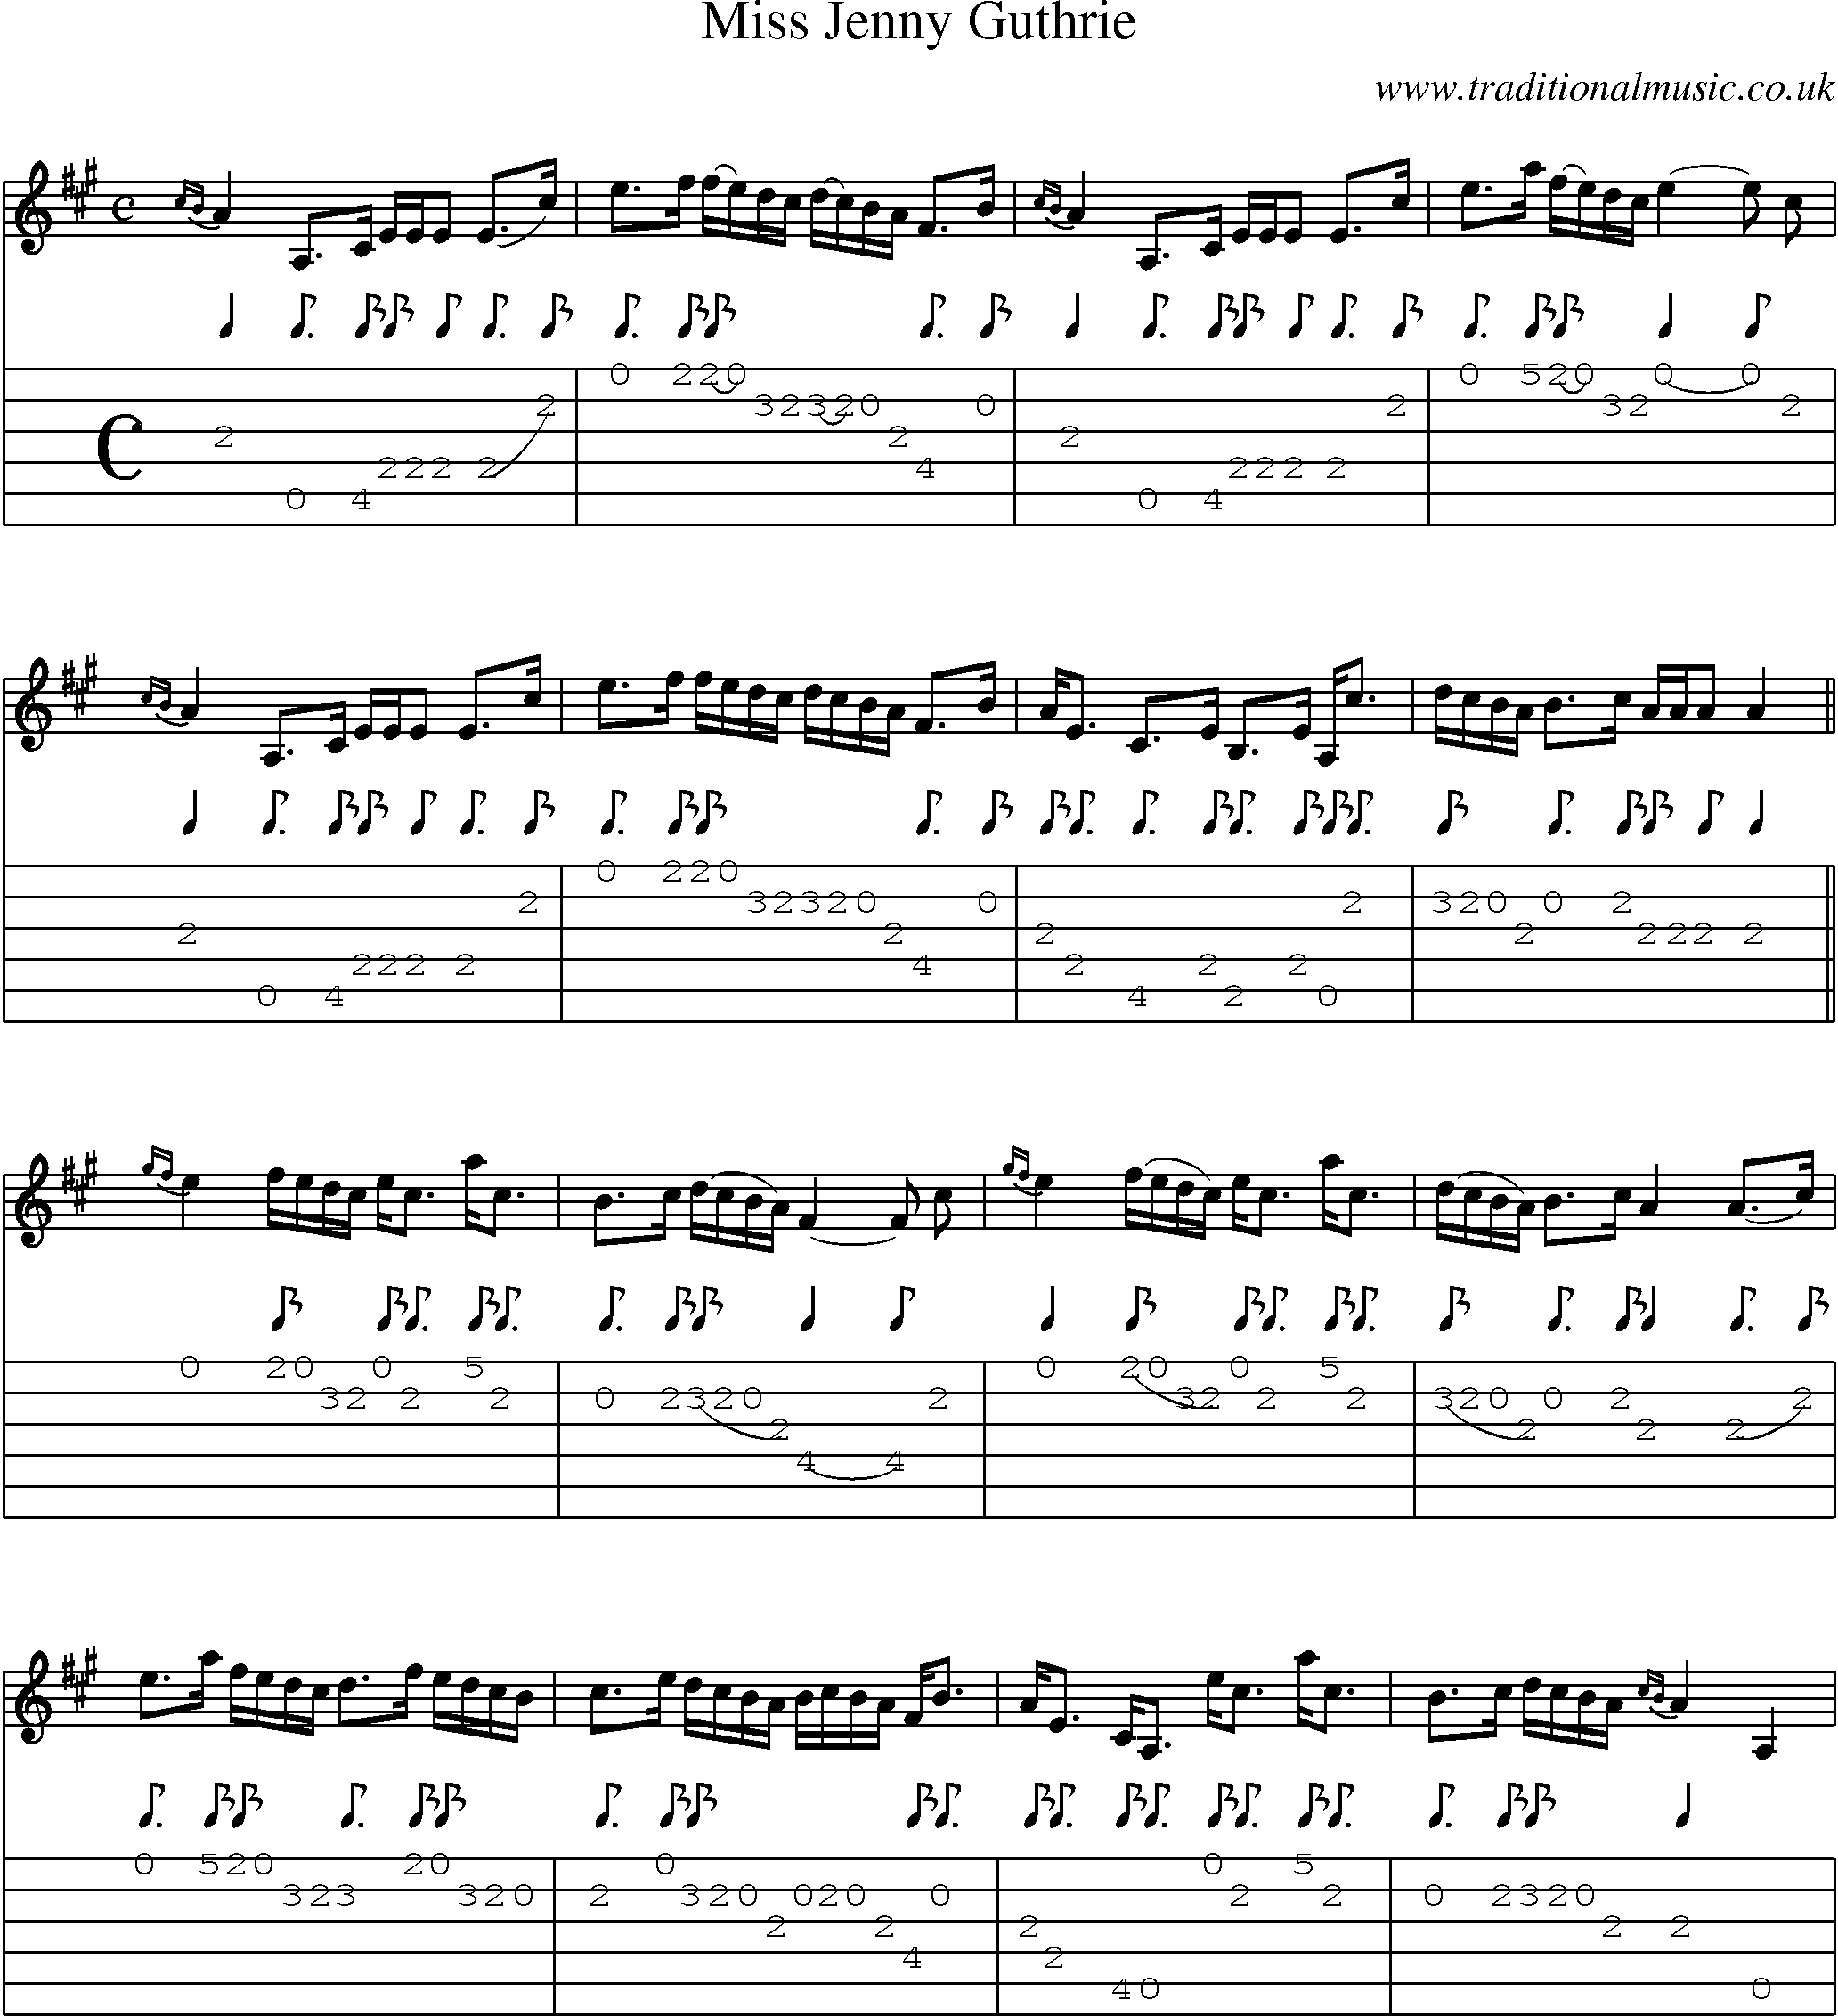 Music Score and Guitar Tabs for Miss Jenny Guthrie